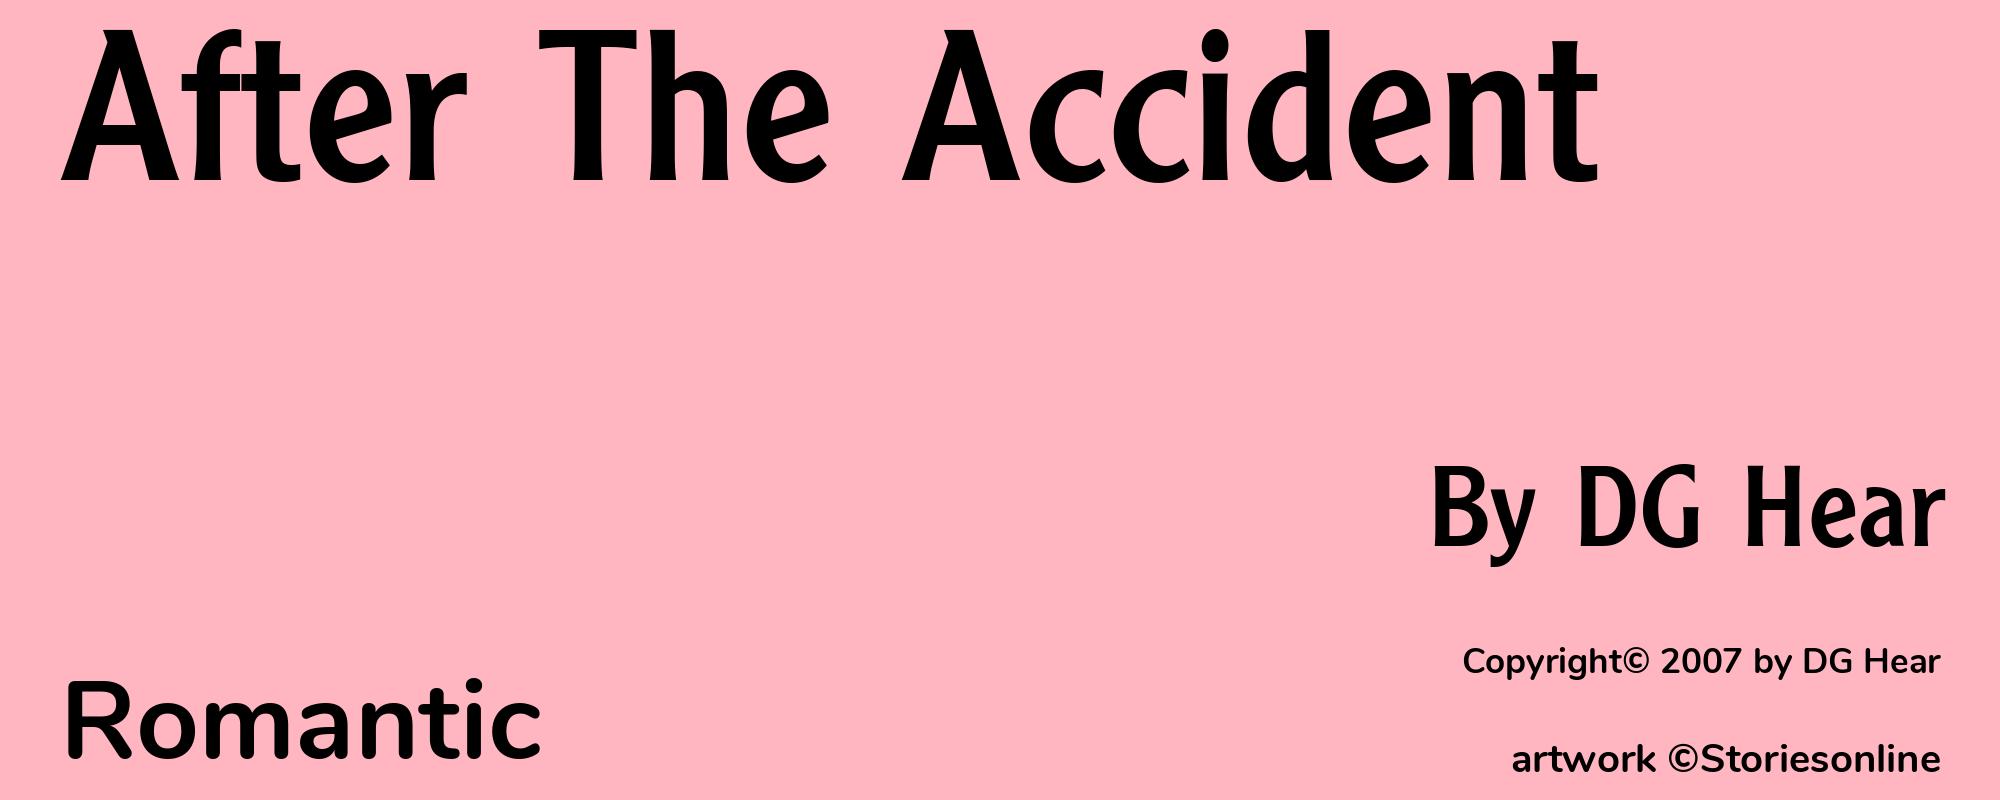 After The Accident - Cover